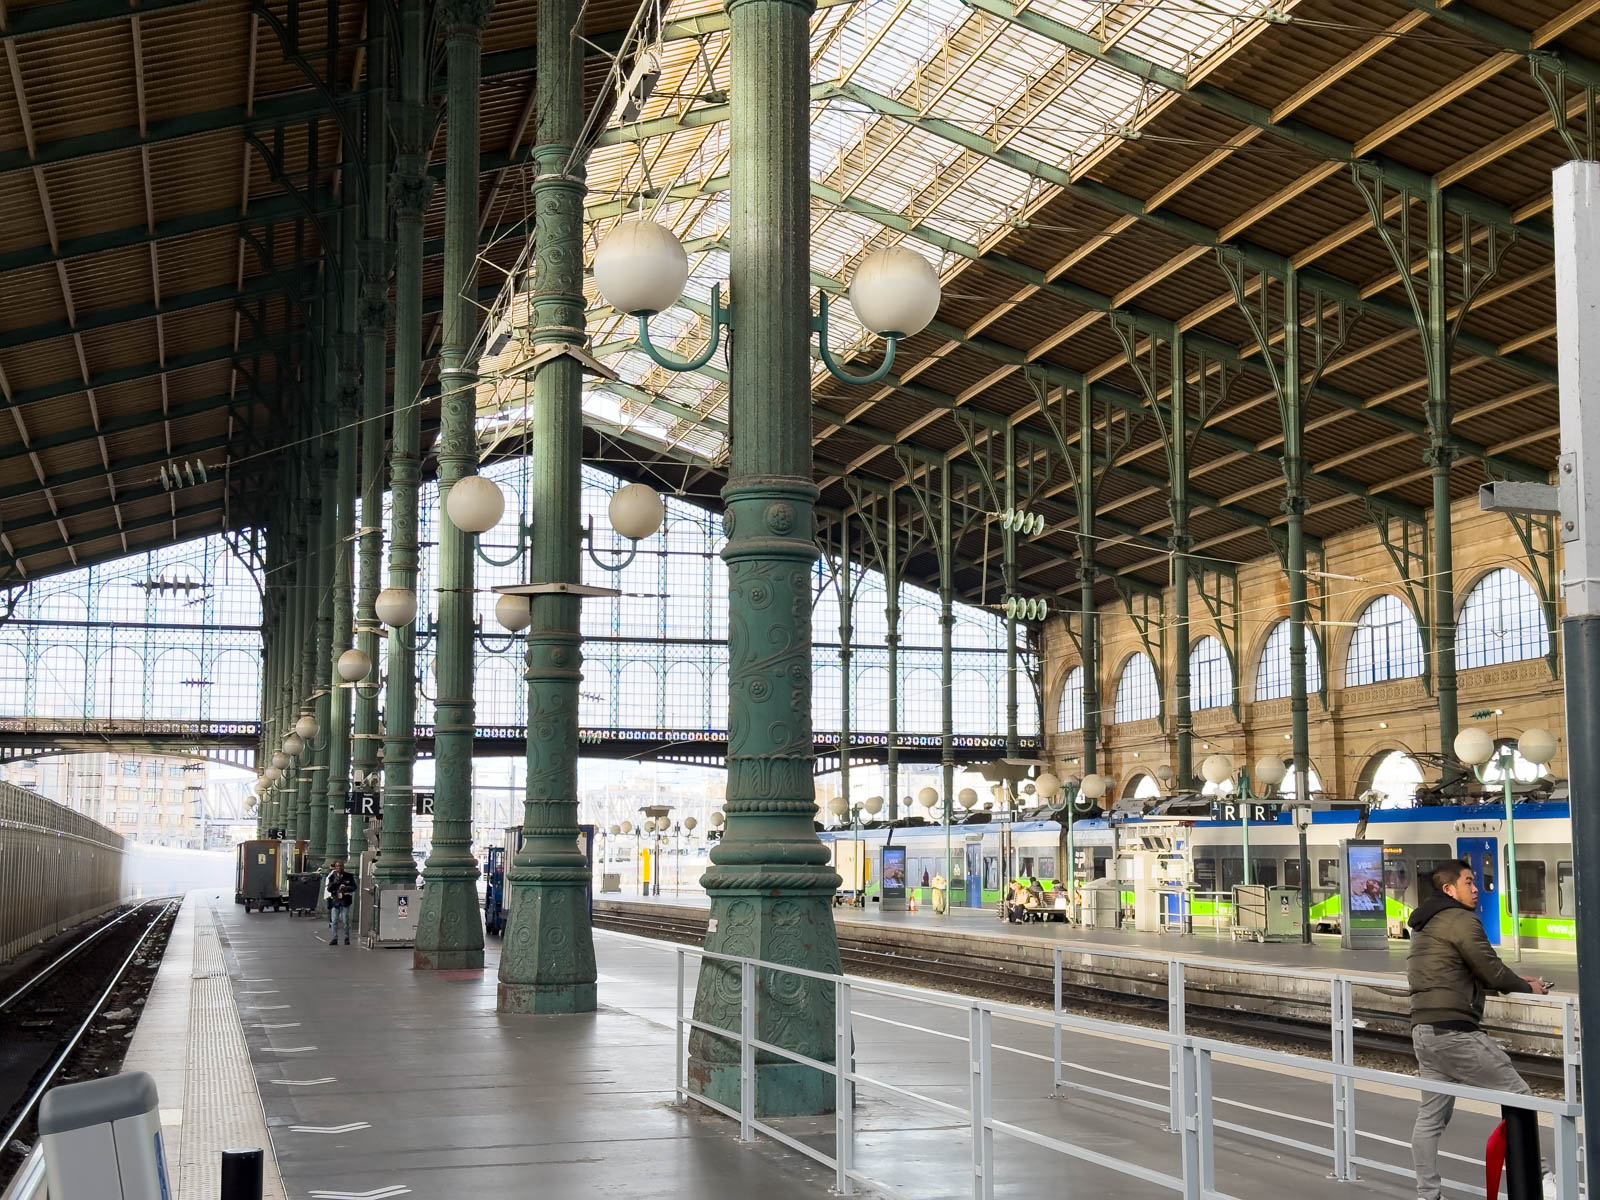 The train station in Paris.